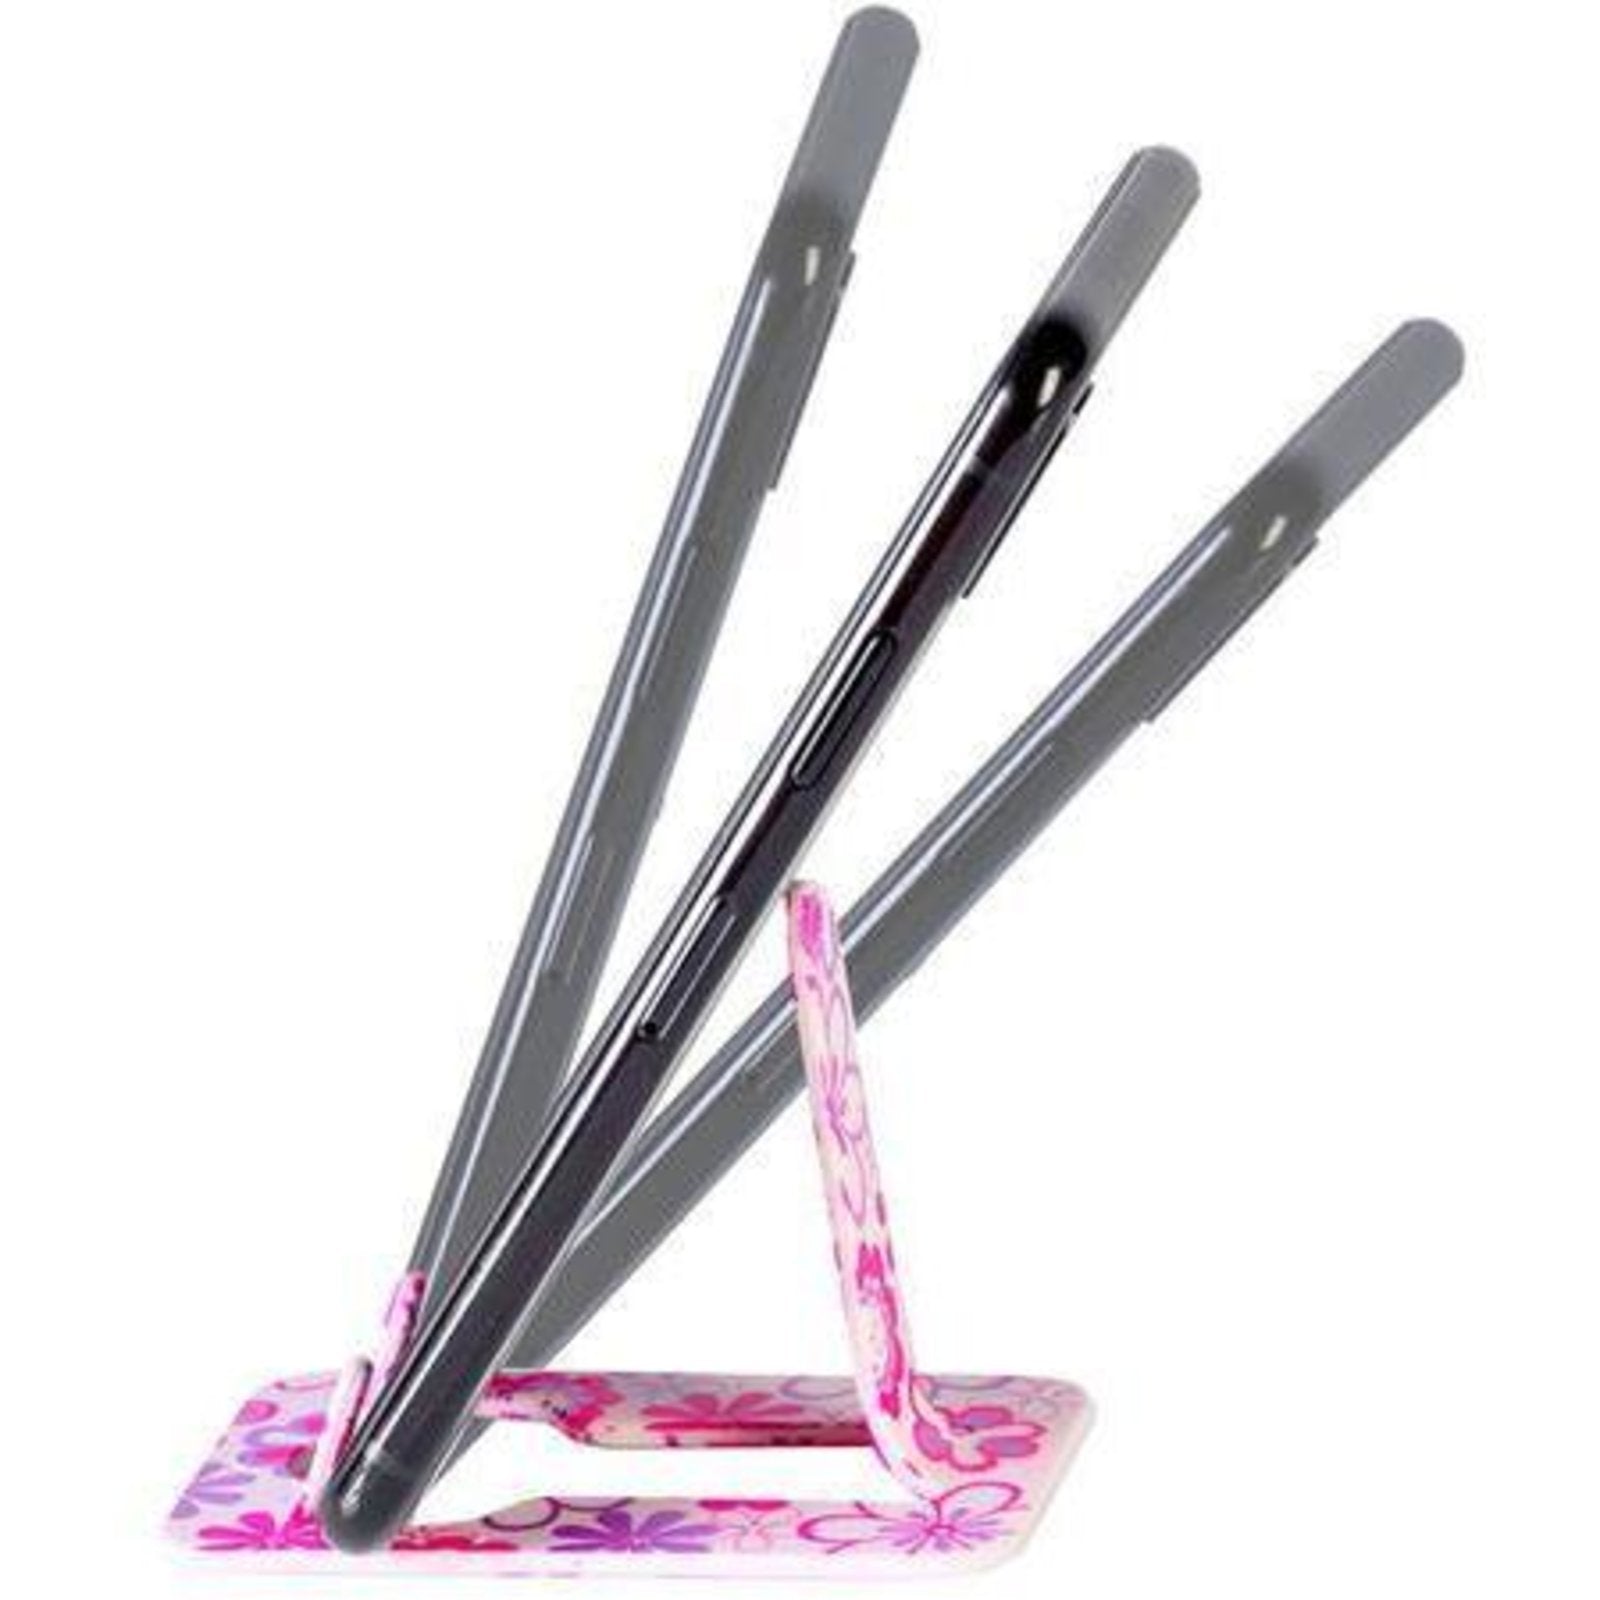 thinking-gifts-flexistand-pink-flower